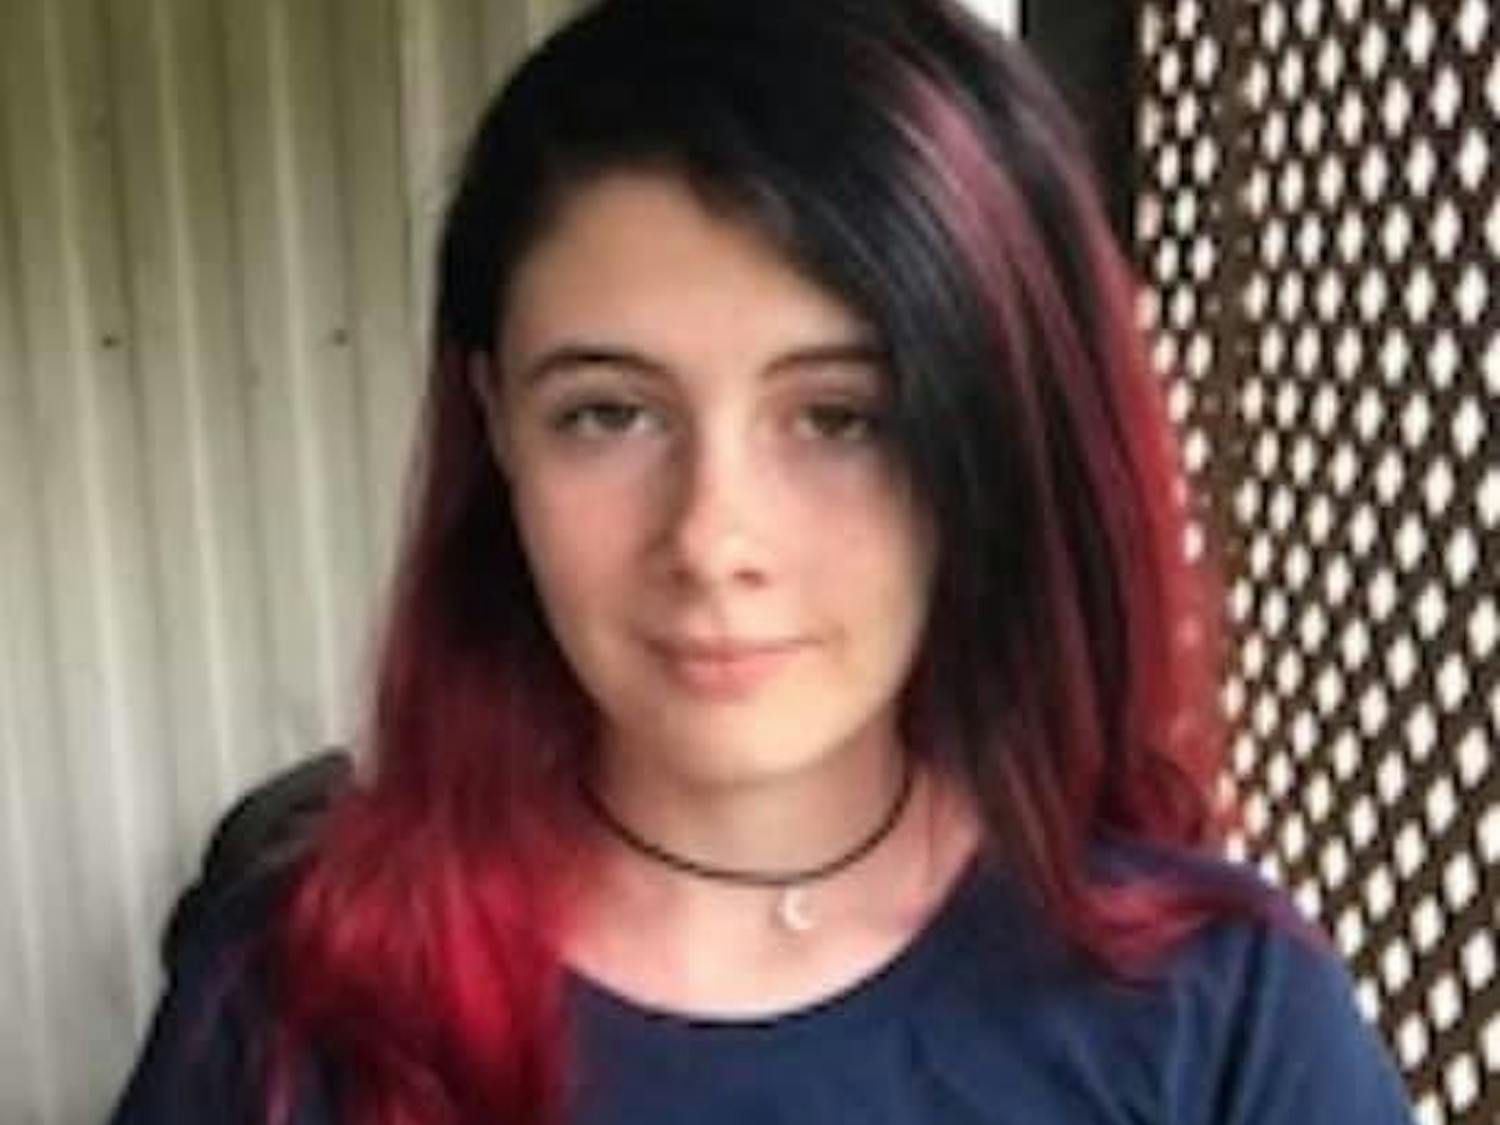 Angelina Glover, a 16-year-old from Coolville, has been missing since May 28.